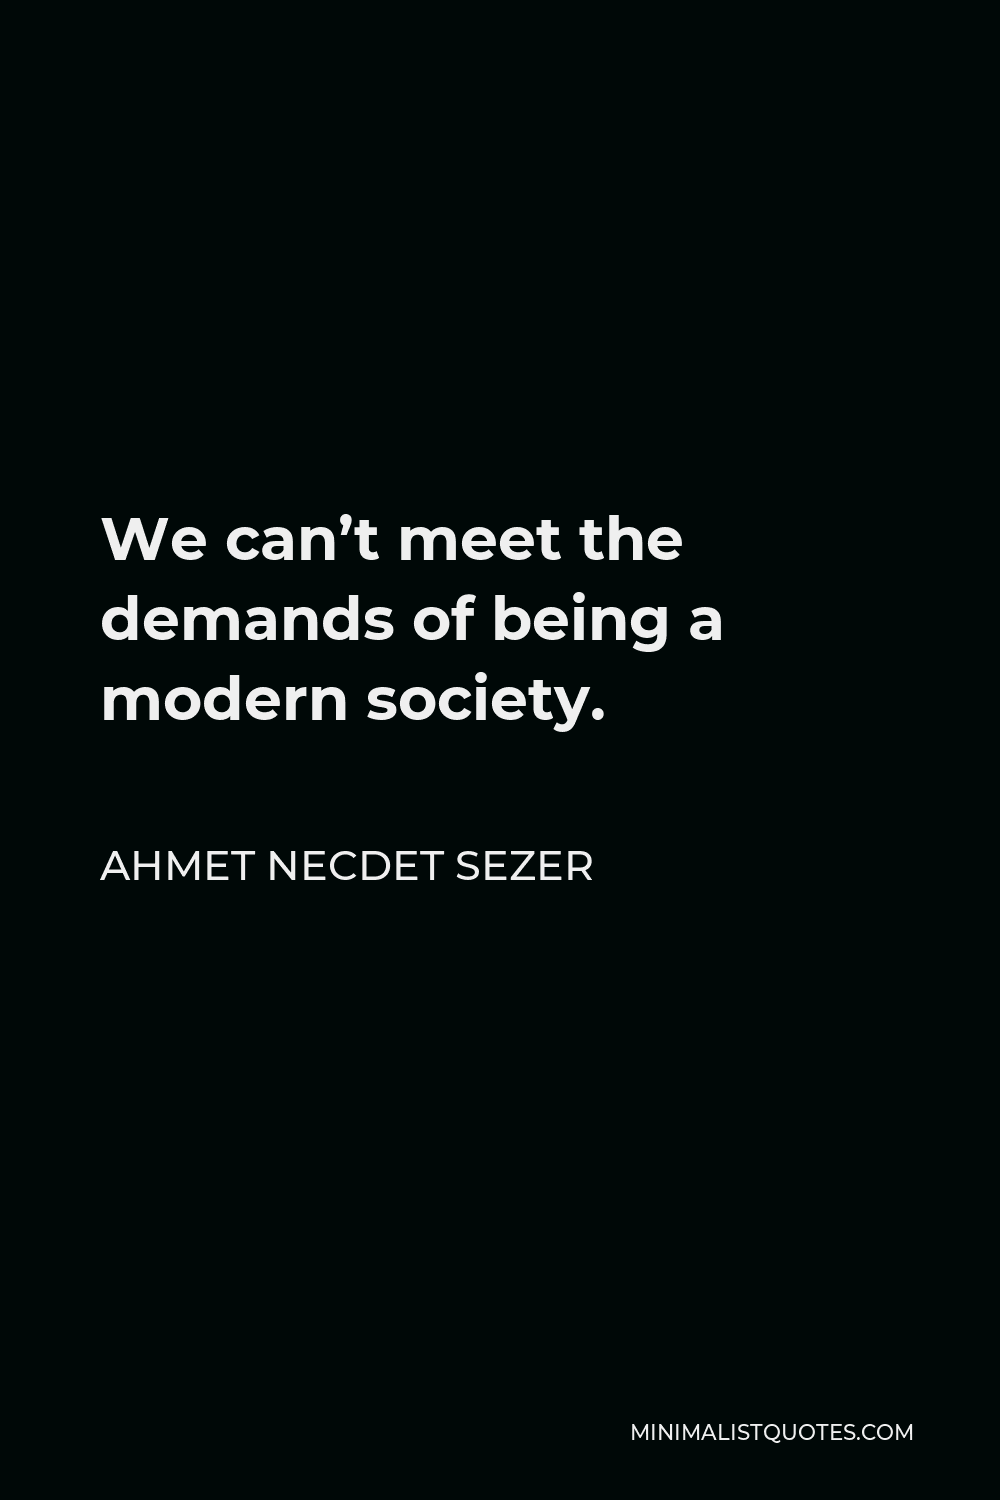 Ahmet Necdet Sezer Quote - We can’t meet the demands of being a modern society.